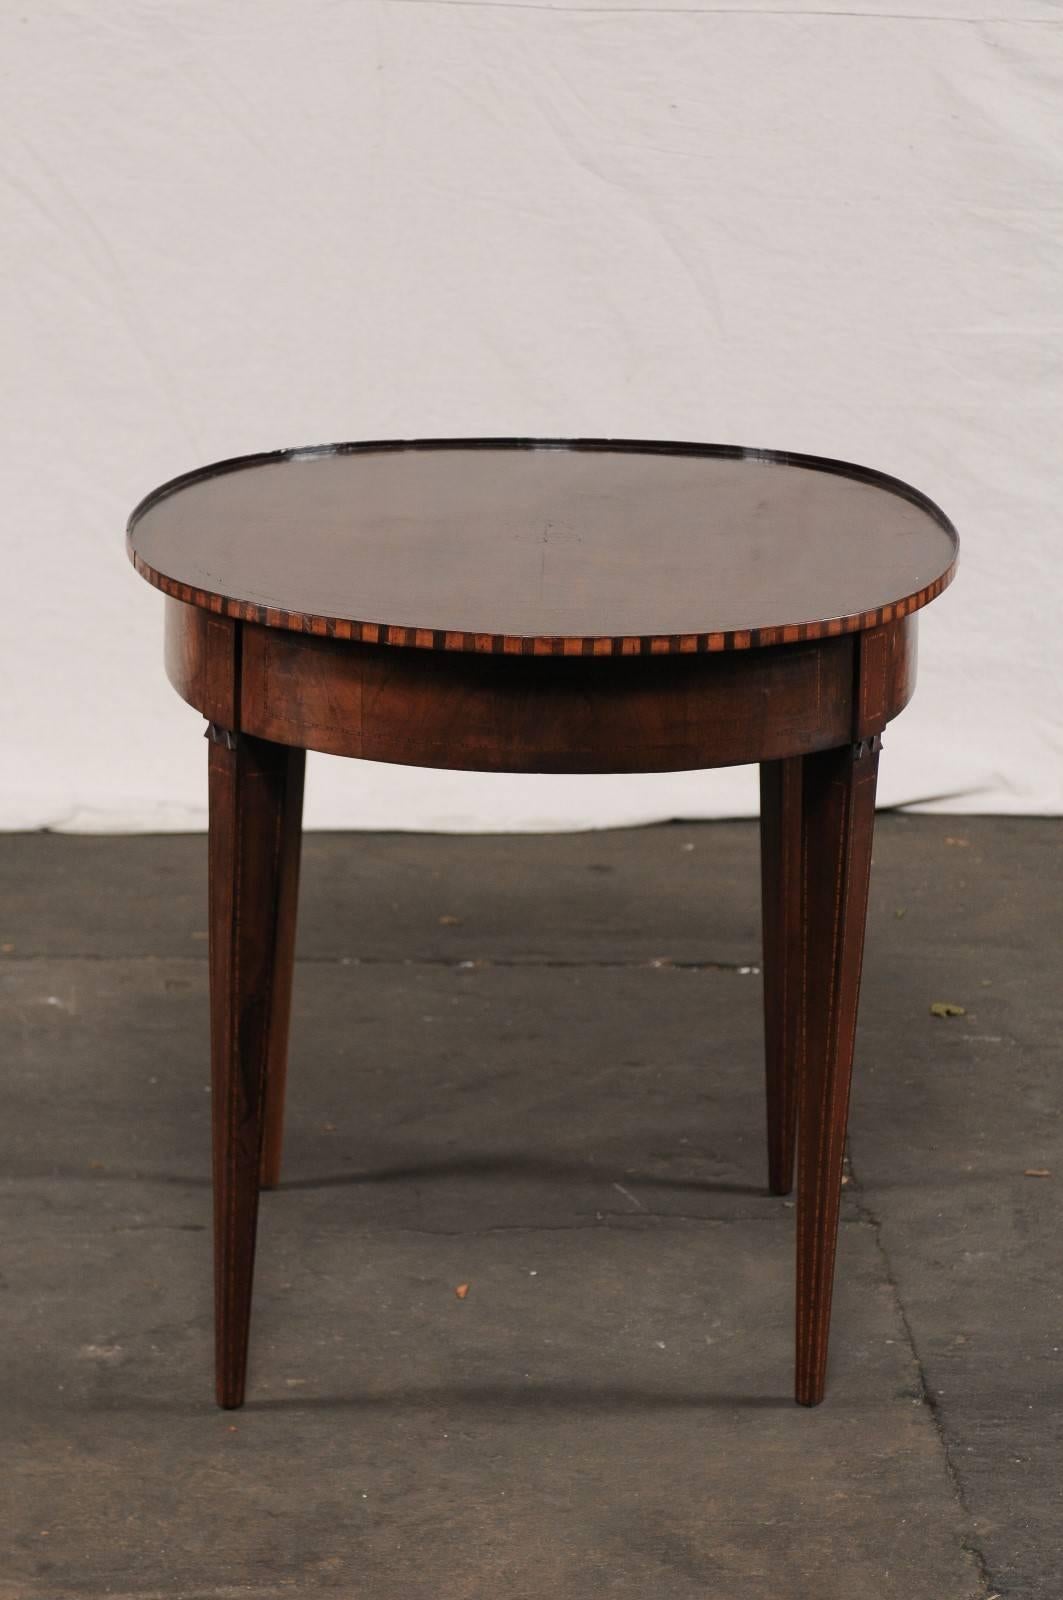 19th Century Neoclassical Inlaid Mahogany Oval Table 4